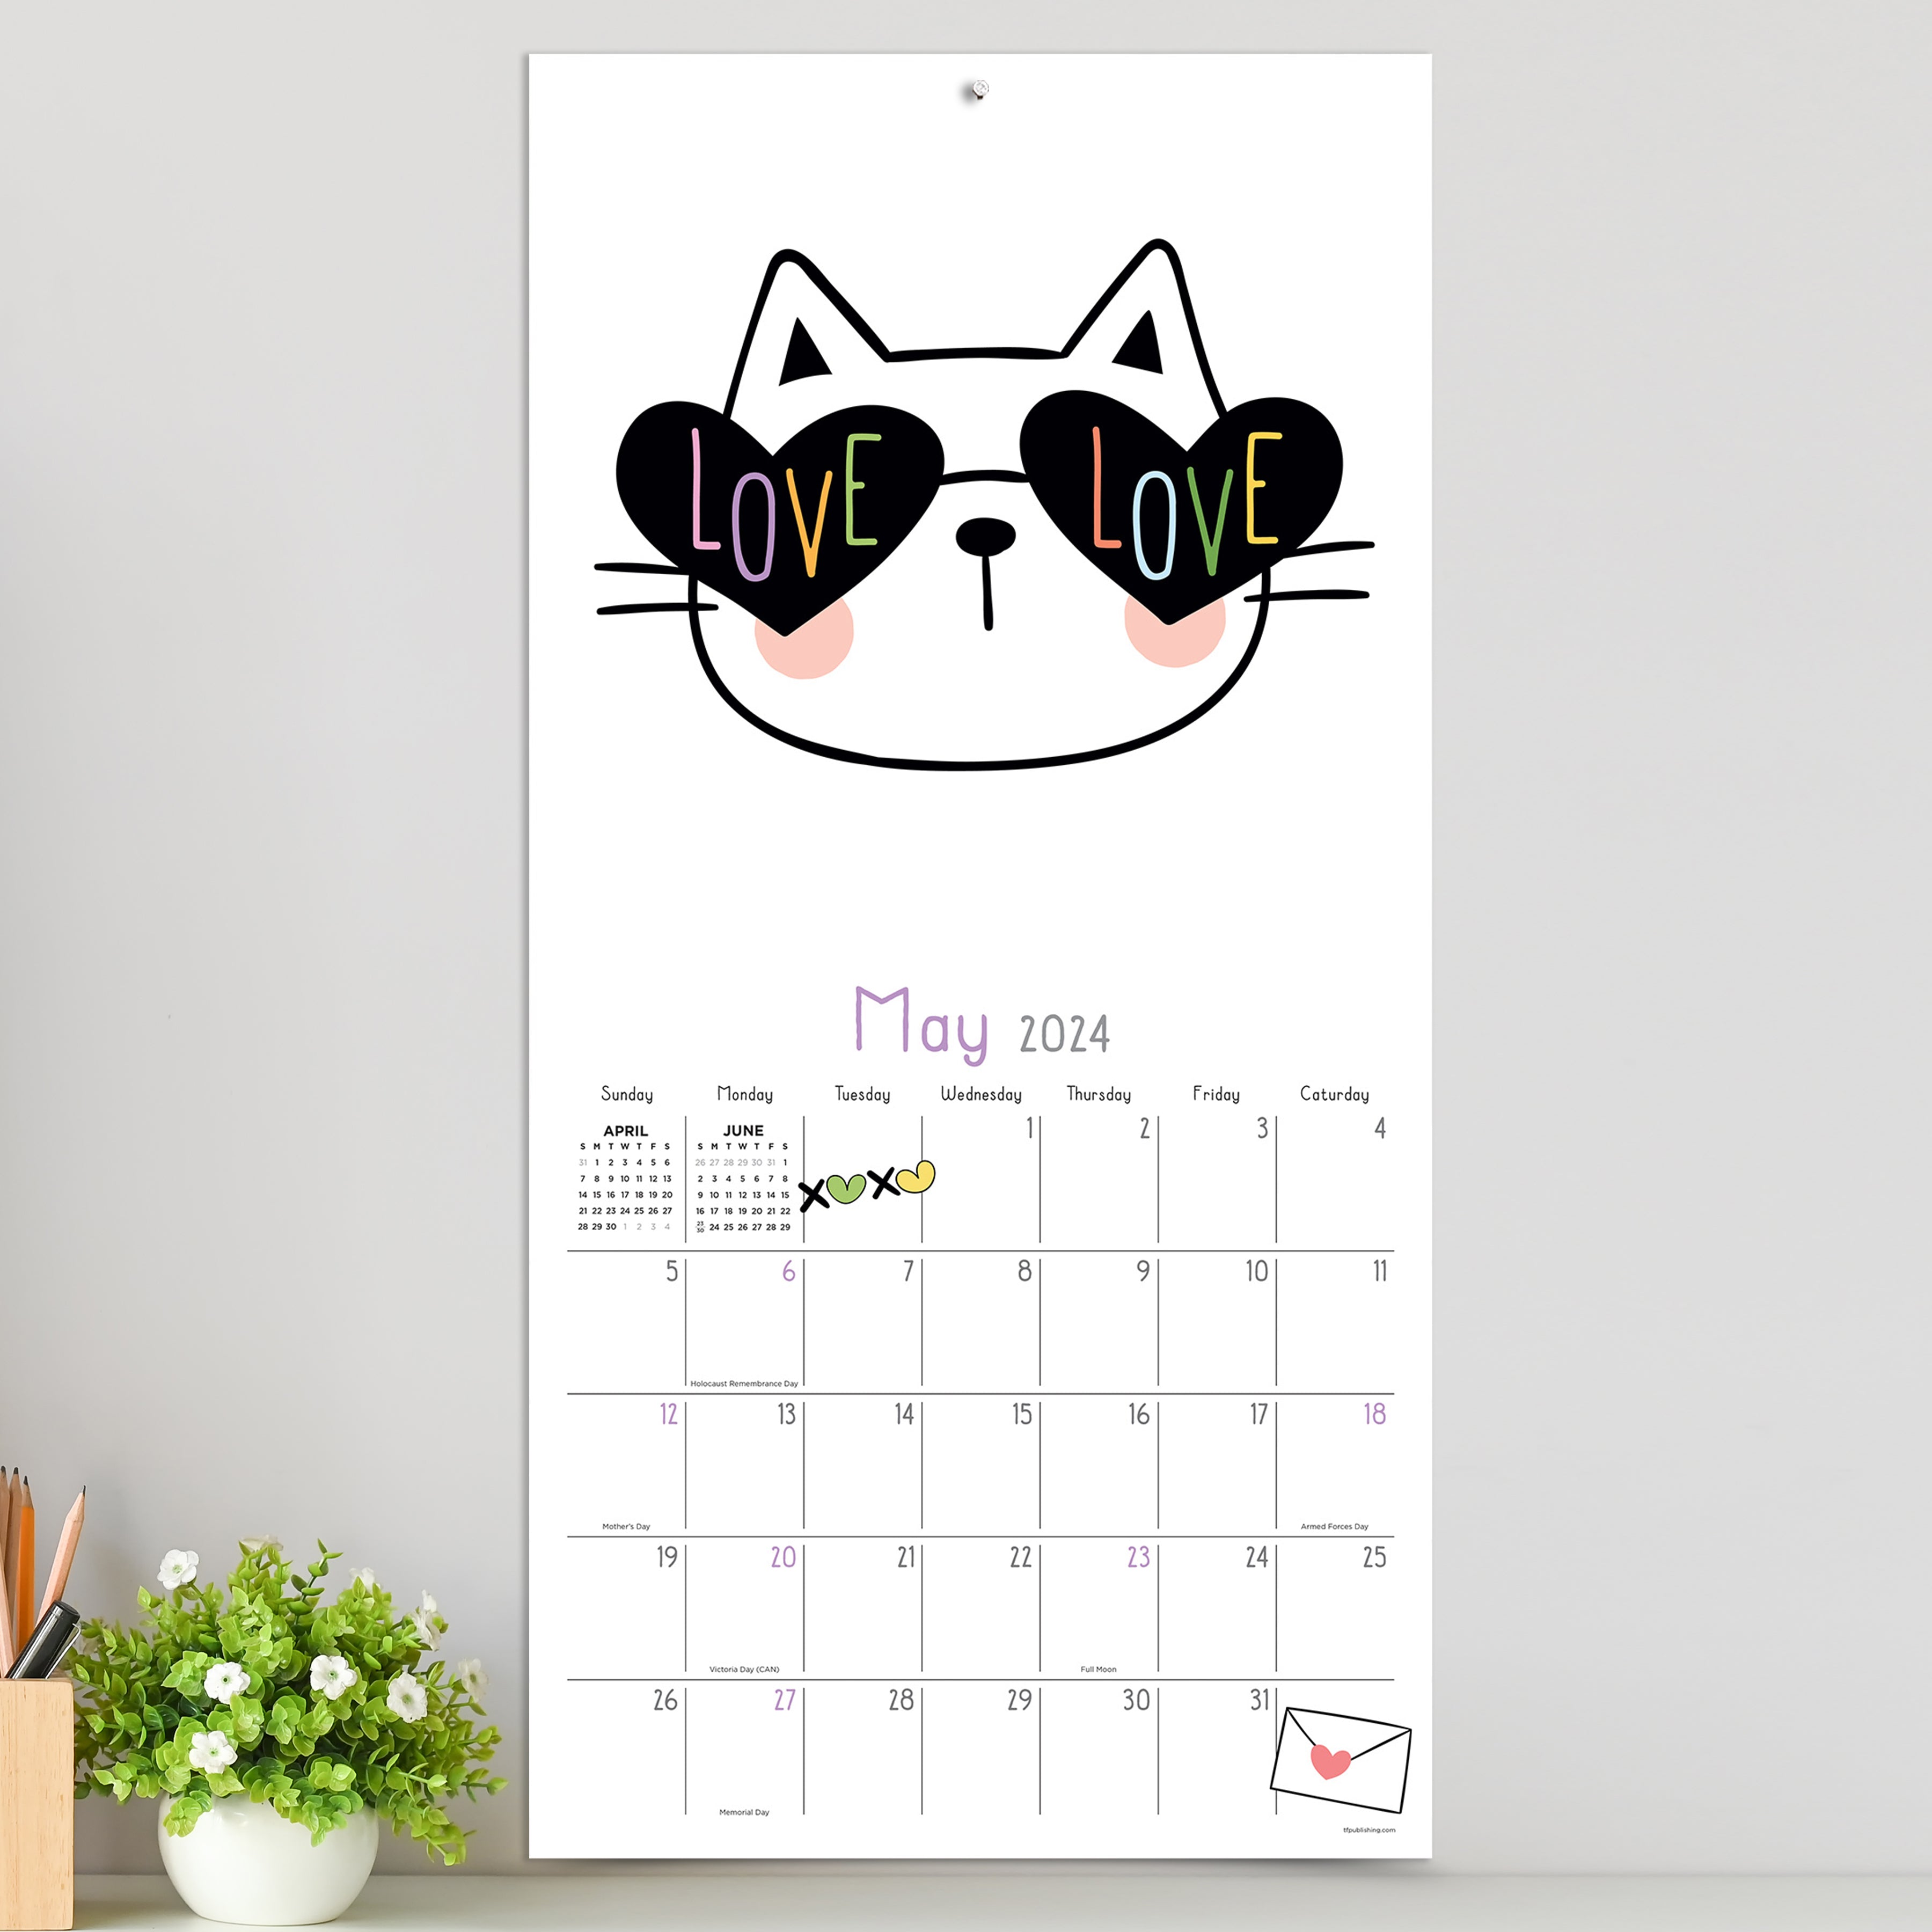 2024 Must Love Cats - Square Wall Calendar